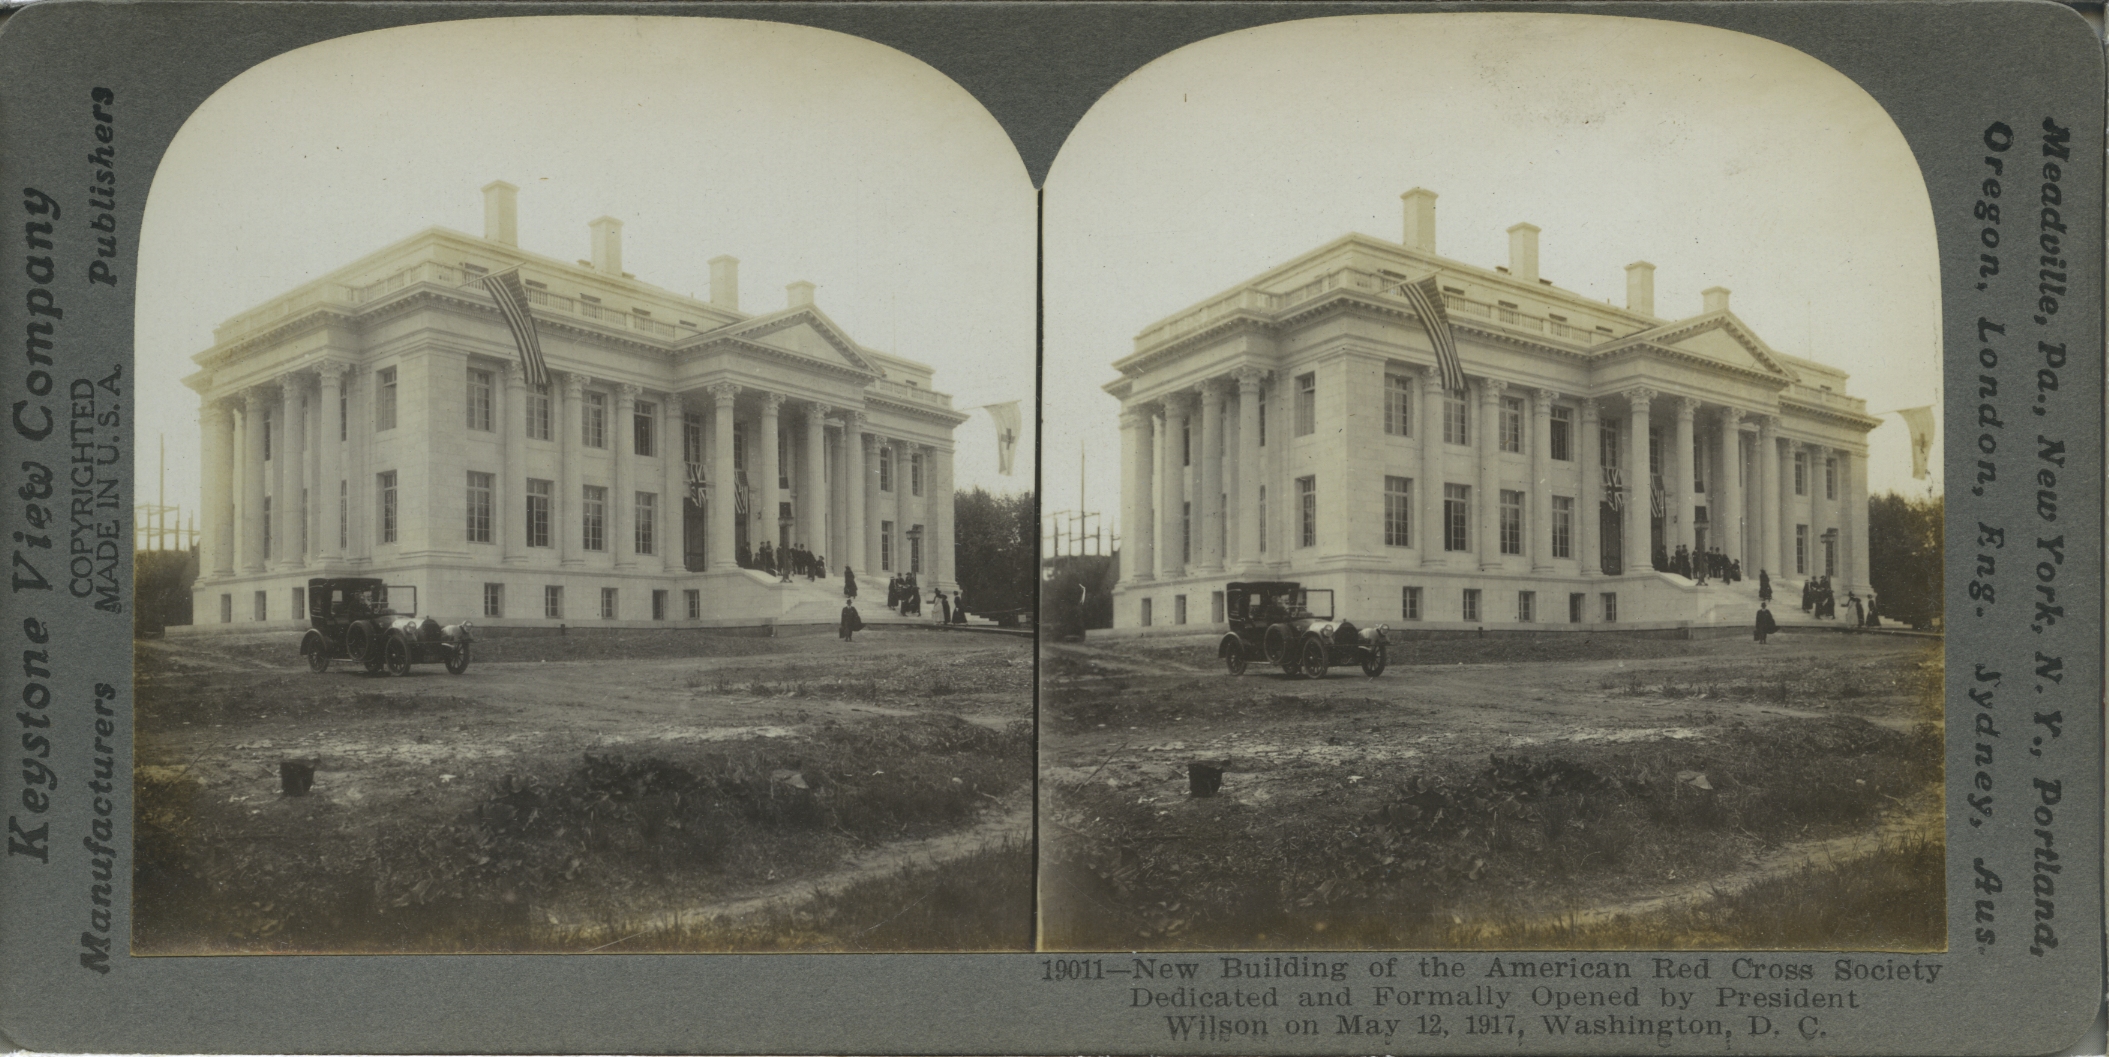 New Building of the American Red Cross Society Dedicated and Formally Opened by President Wilson on May 12, 1917, Washington, D.C.